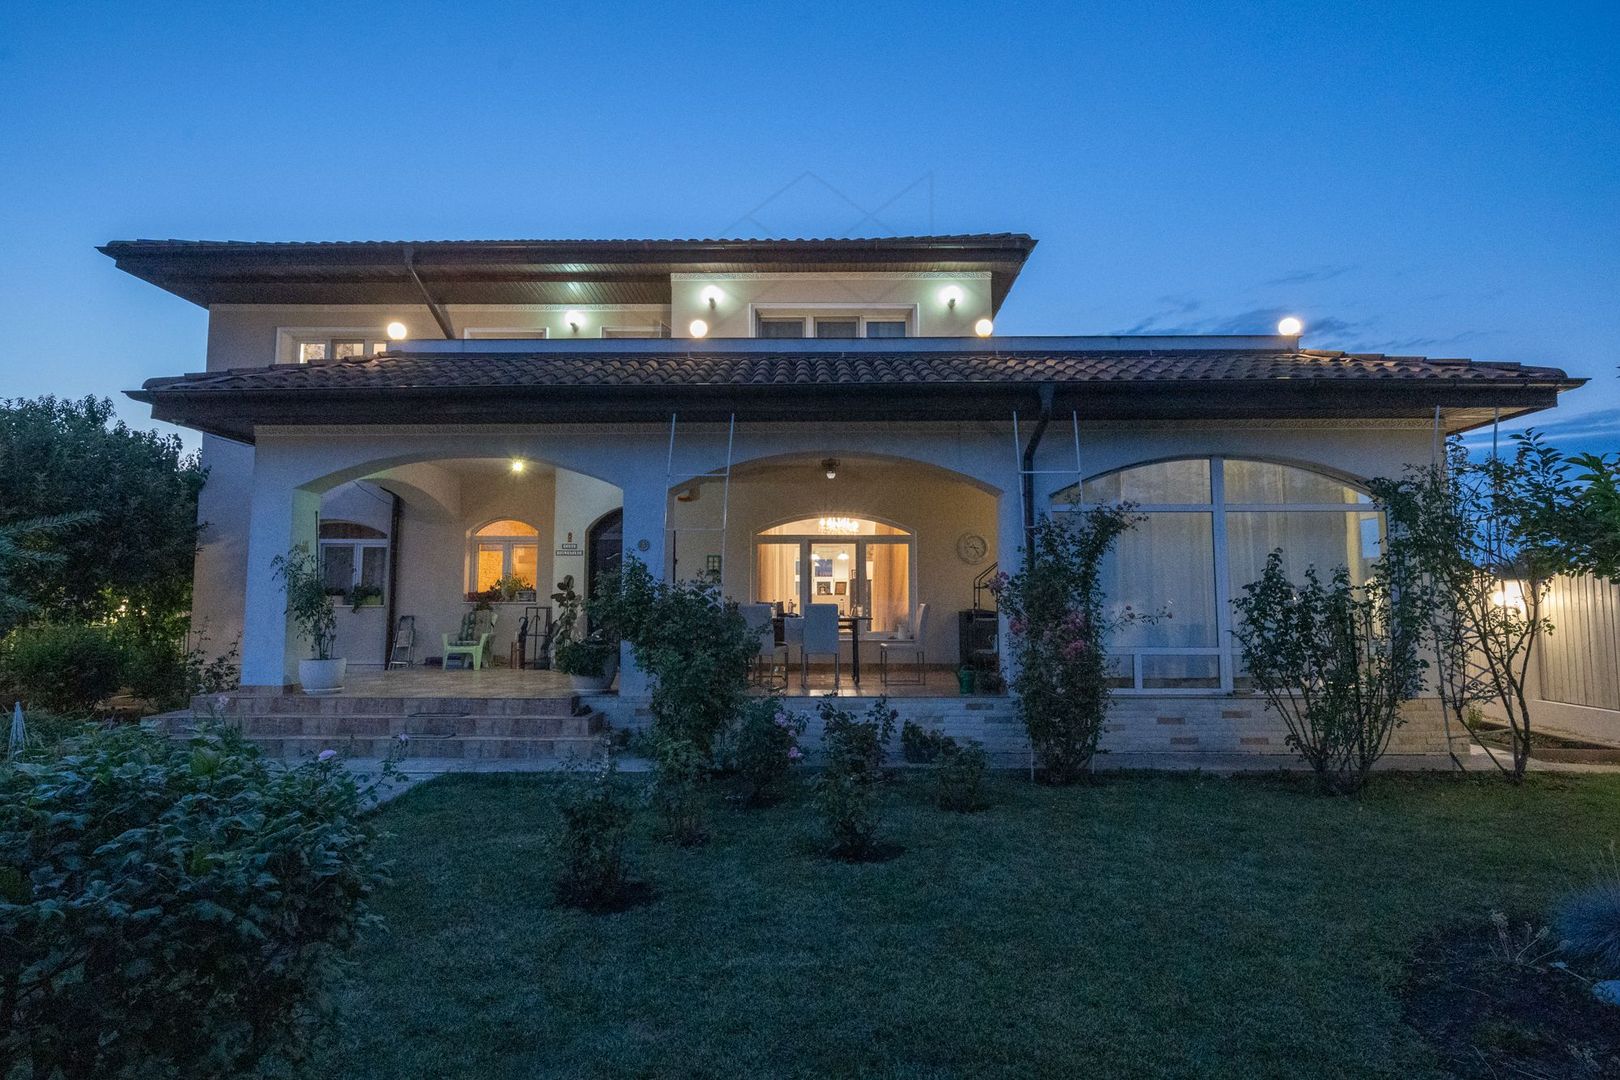 Saftica | Superb house in Mediterranean style on a plot of 700 sm land